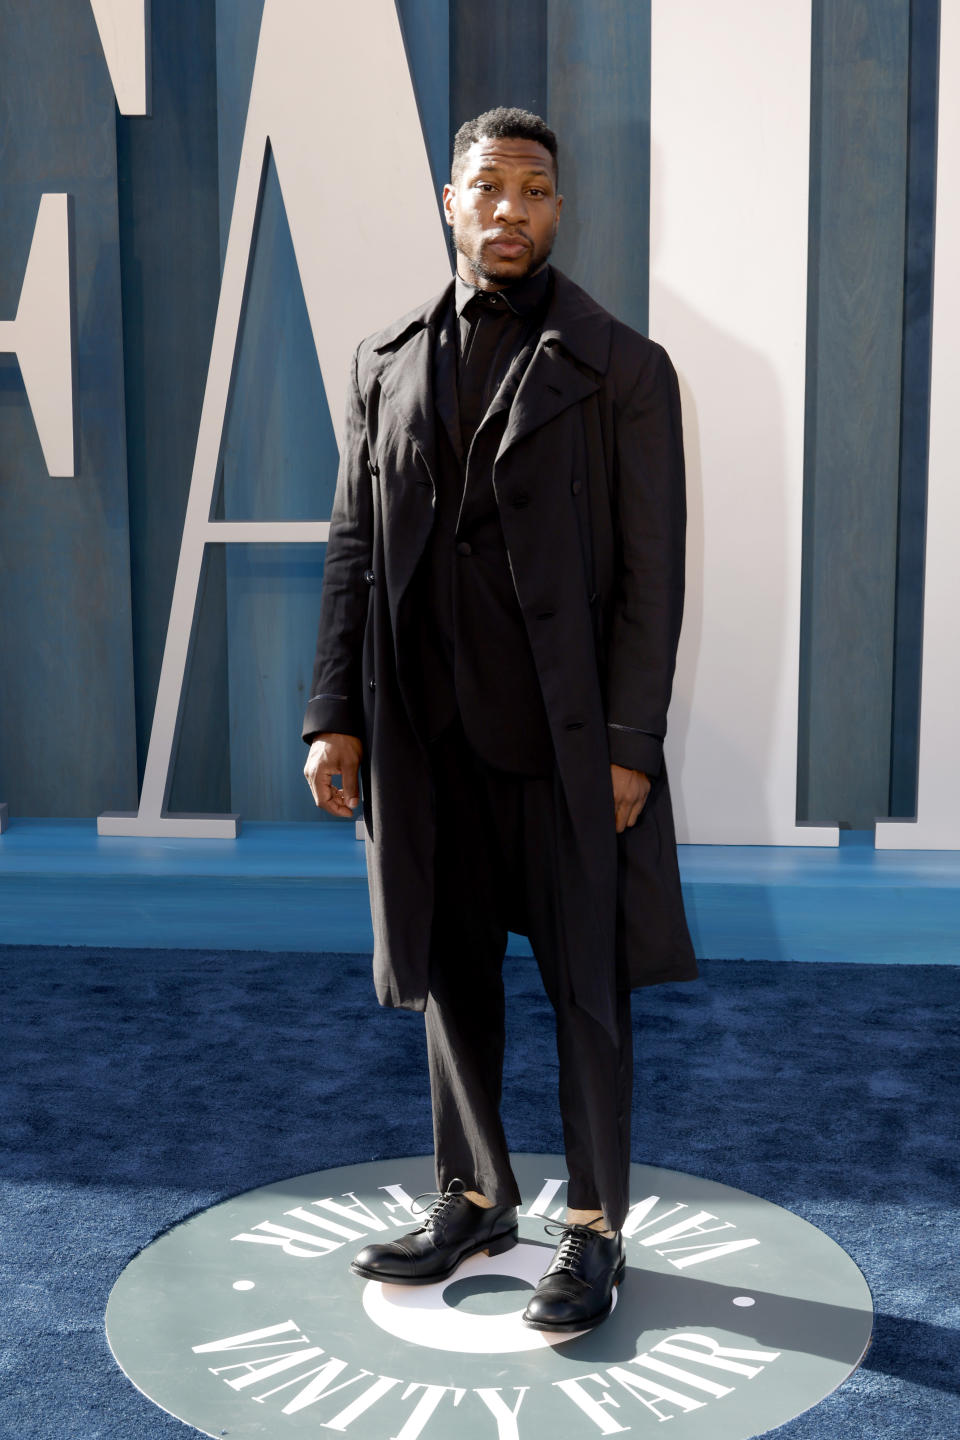 Jonathan Majors attends the 2022 Vanity Fair Oscar Party hosted by Radhika Jones at Wallis Annenberg Center for the Performing Arts on March 27, 2022 in Beverly Hills, California.